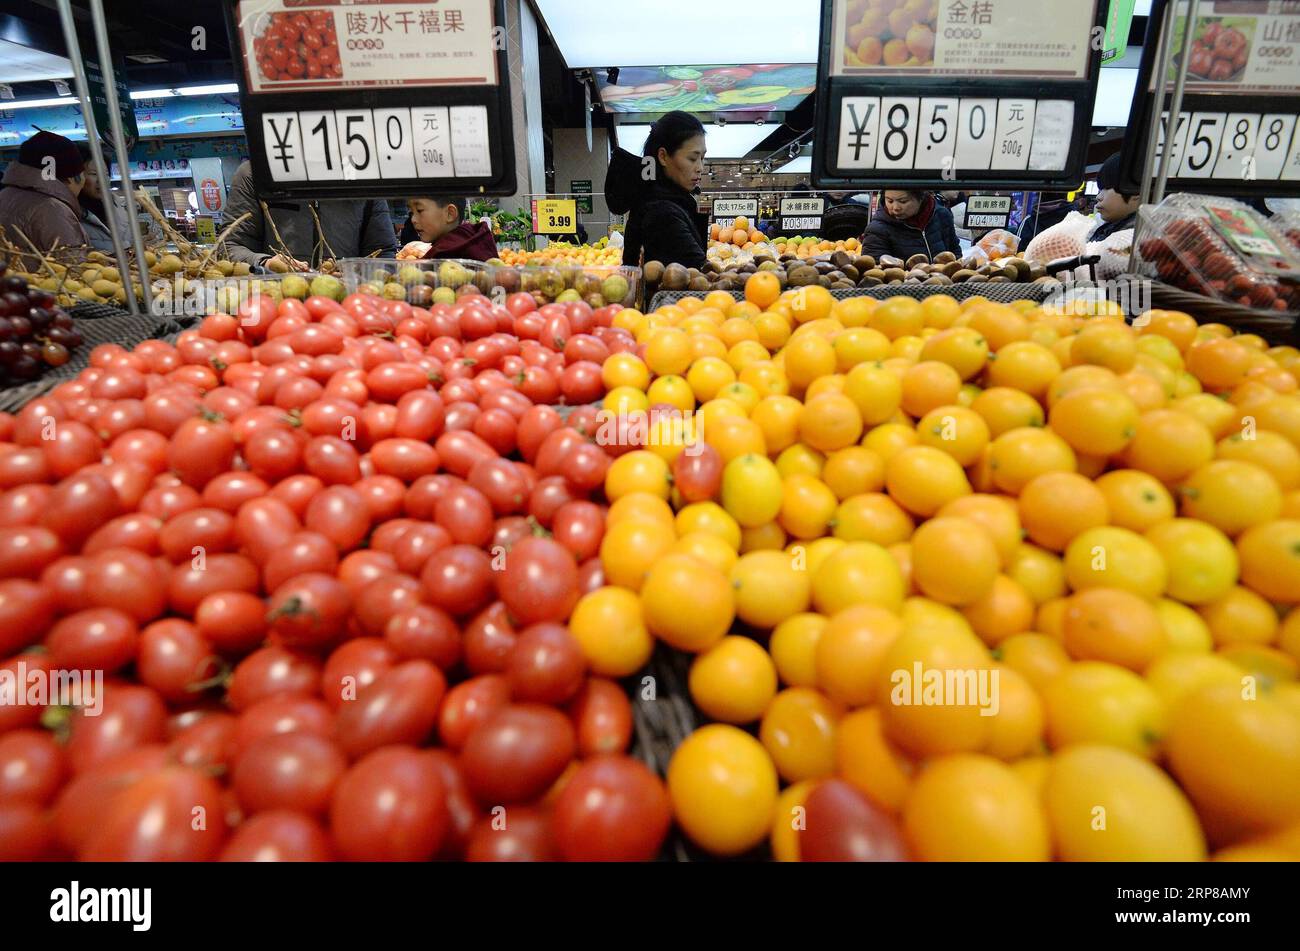 (190225) -- BEIJING, Feb. 25, 2019 -- Citizens select fruits at a supermarket in Handan City, north China s Hebei Province, Dec. 9, 2018. China has unveiled a guideline to enhance the accountability system of local governments to strengthen supervision over food safety. Food safety will be included in the performance assessment of the Party and government leading officials, according to the guideline released by the Central Committee of the Communist Party of China (CPC) and the State Council over the weekend. The guideline aims to promote local government s food safety work and improve people Stock Photo